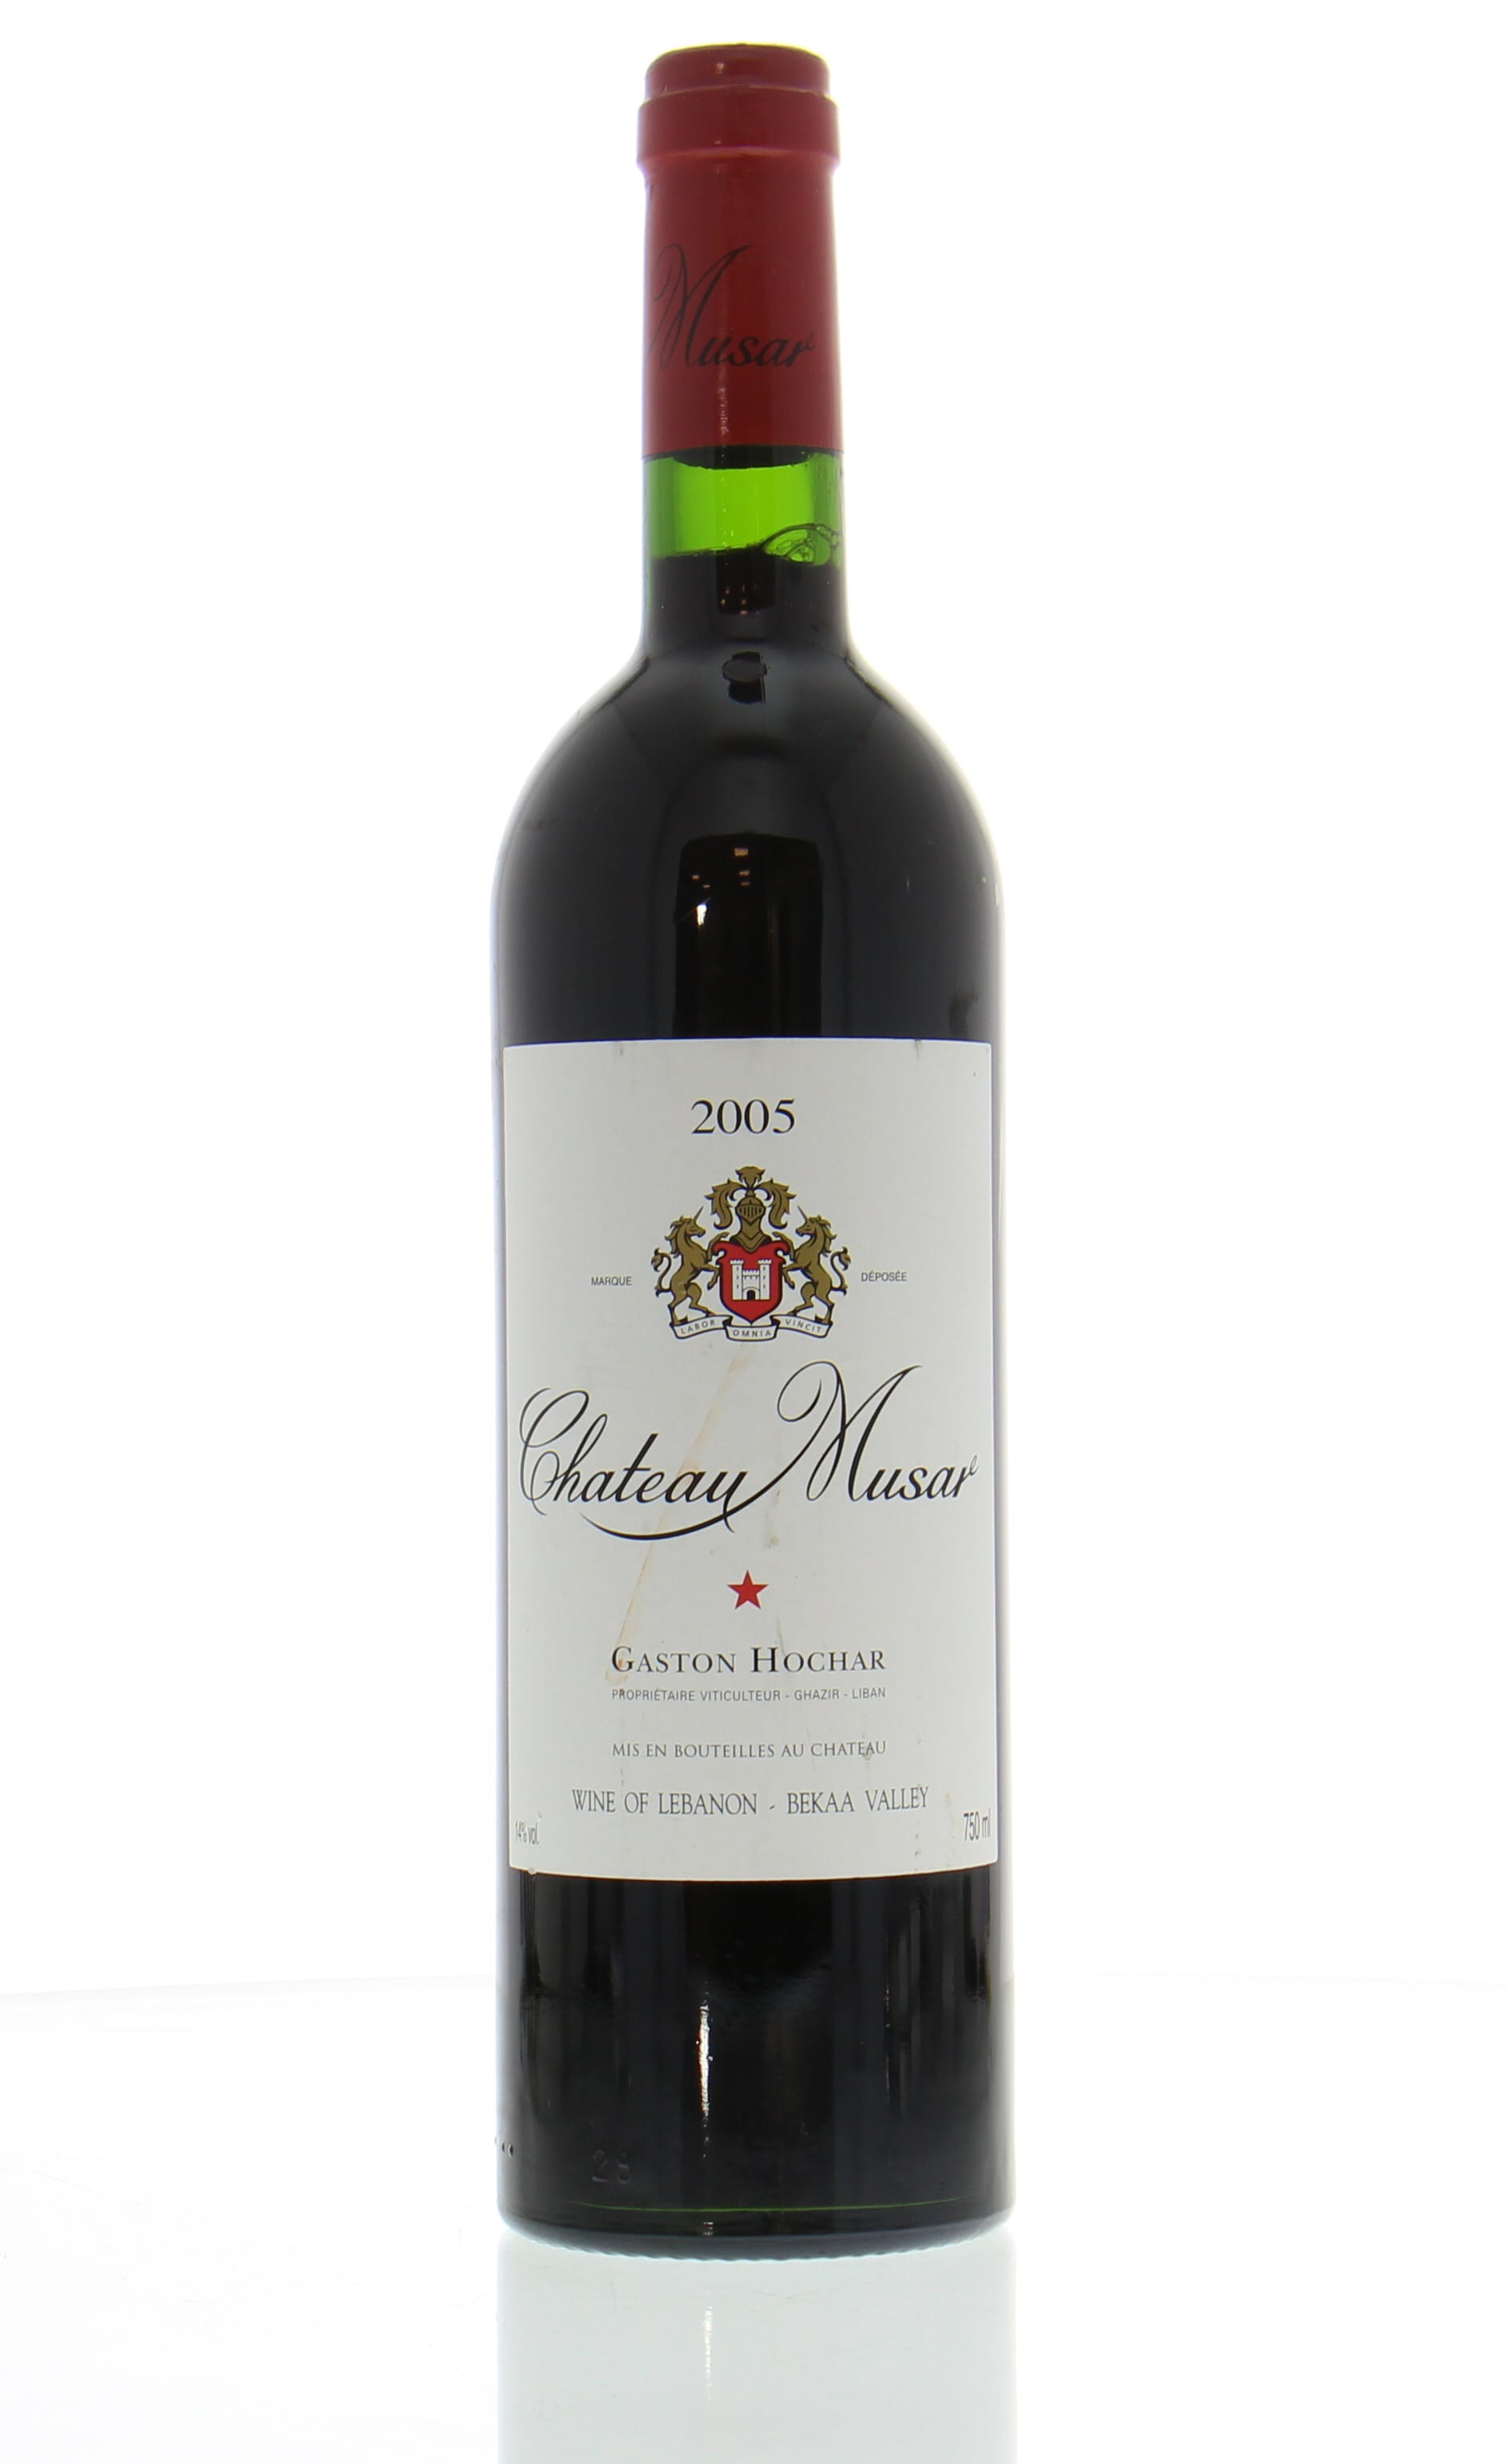 Chateau Musar - Chateau Musar 2005 Perfect